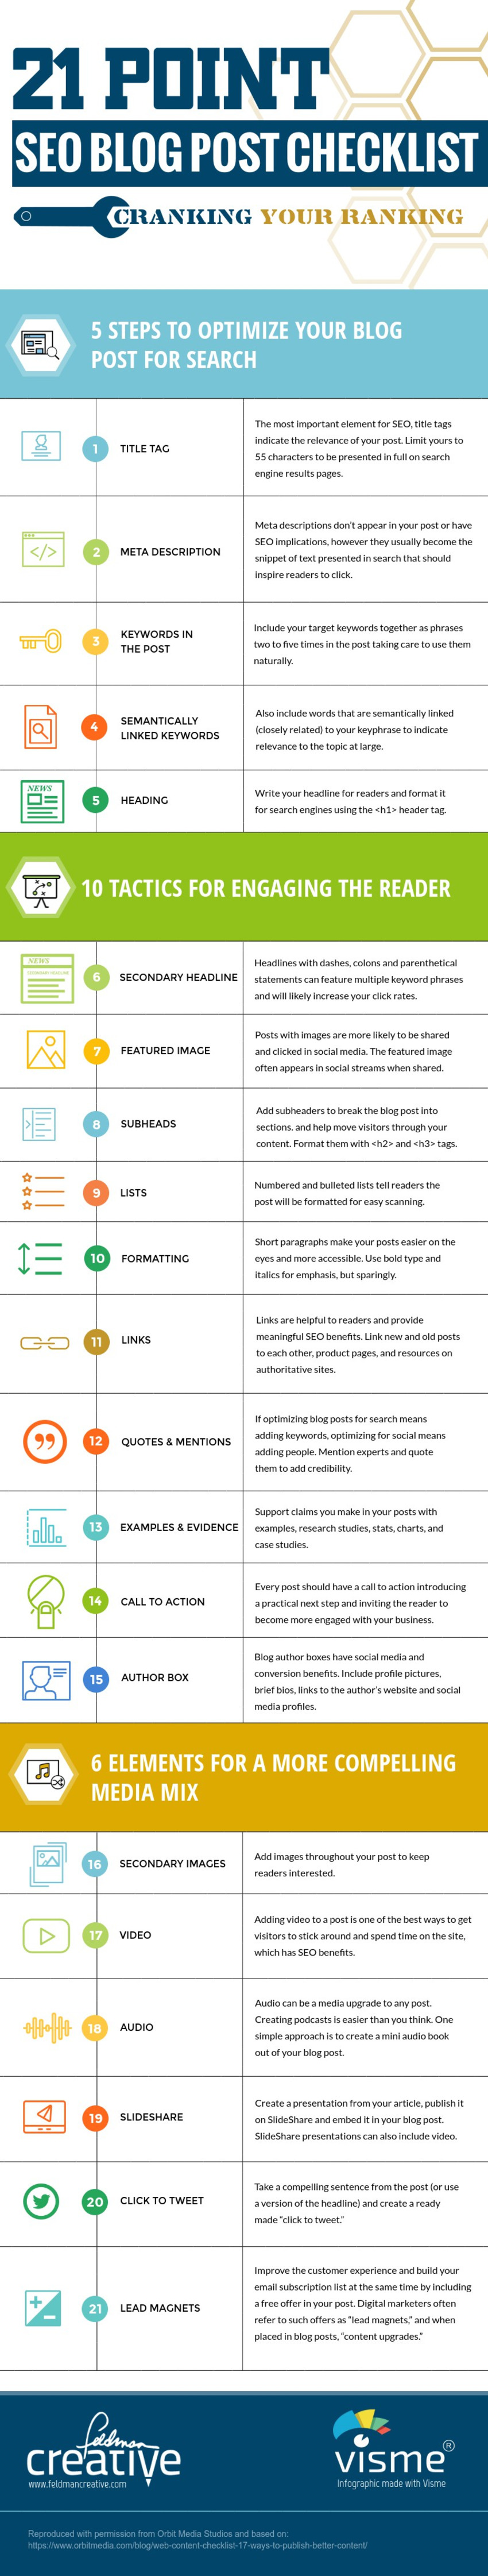 21 Point SEO Blog Post Checklist To Improve Your Rankings [Infographic] - BlueWire Media | The MarTech Digest | Scoop.it